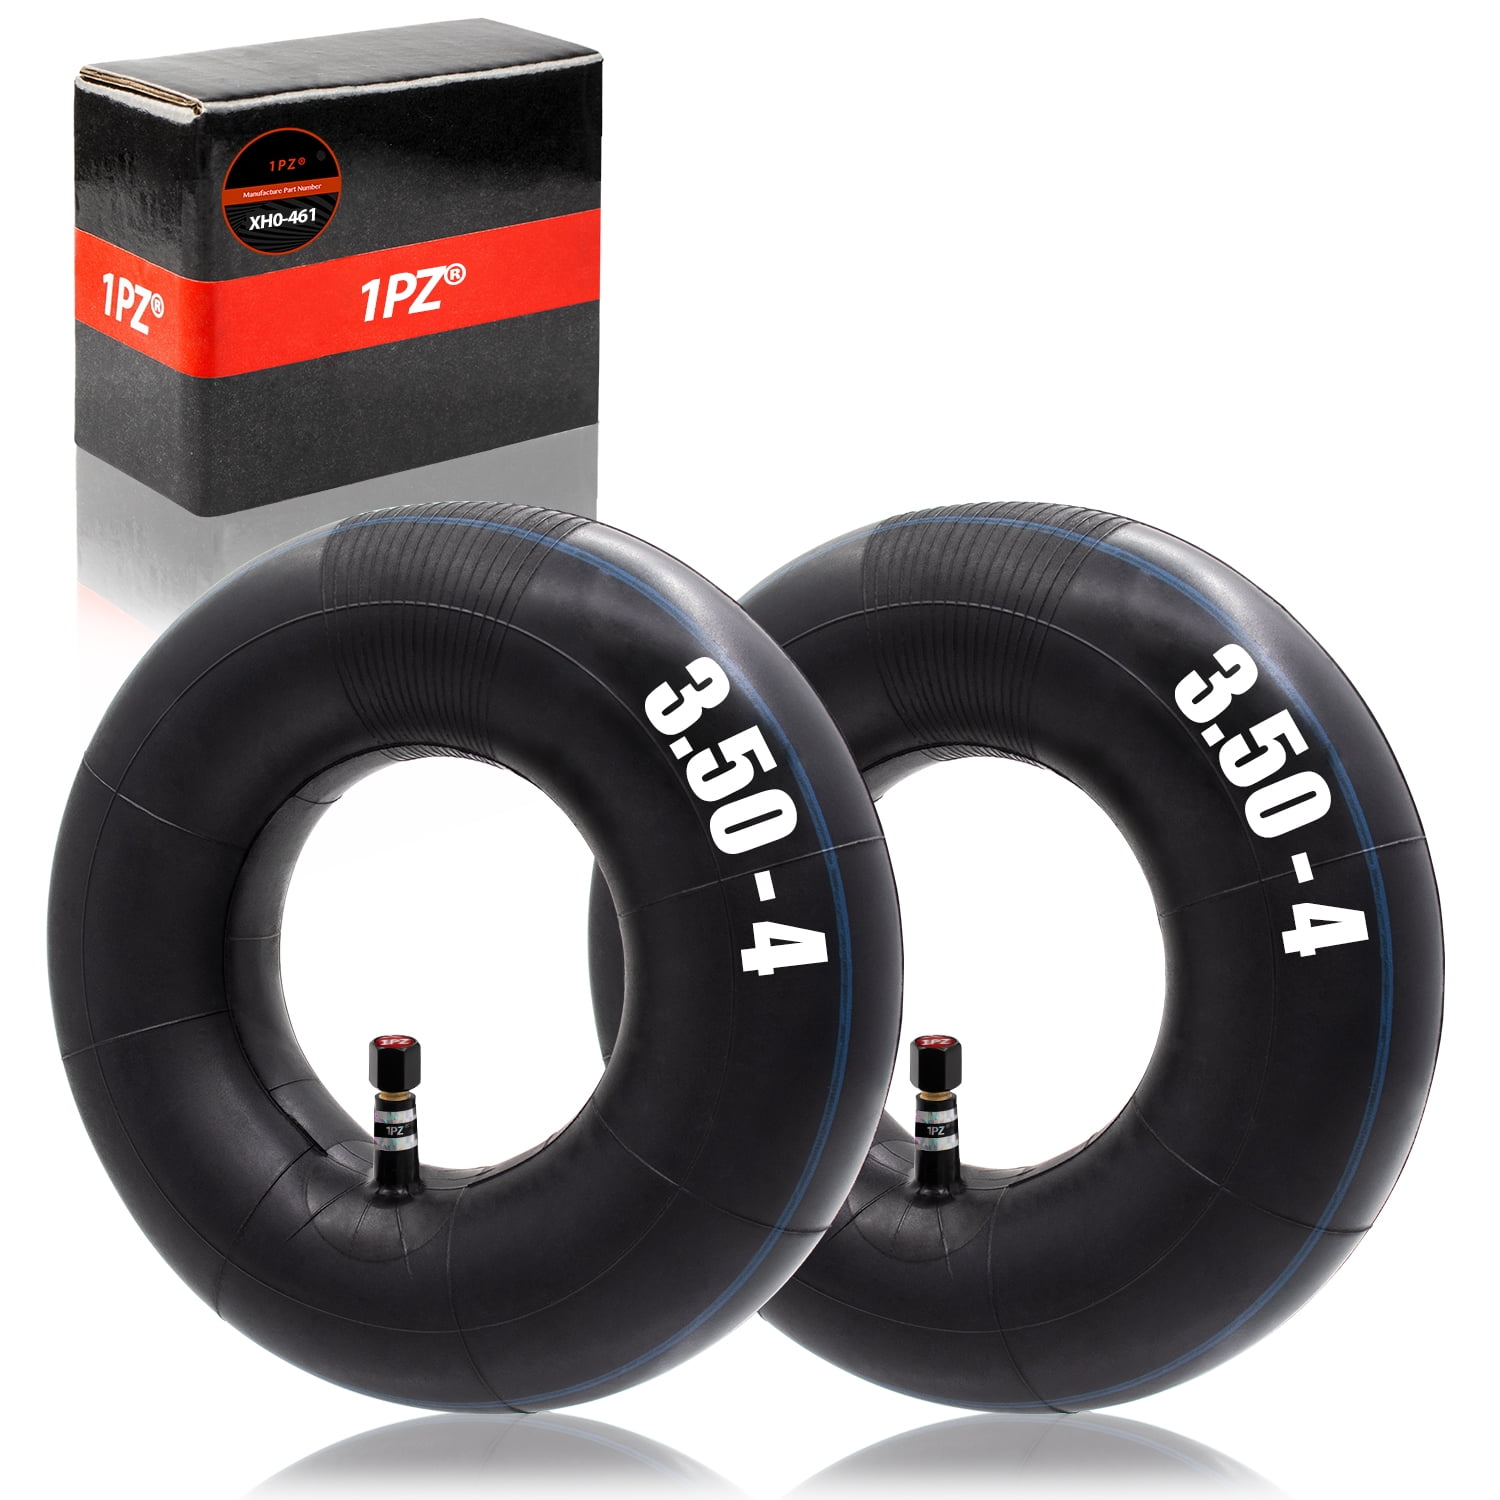 23x8.50-12 NHS TR13 Stem Valve with *FREE SHIPPING* Tire Inner Tube Set of 2 